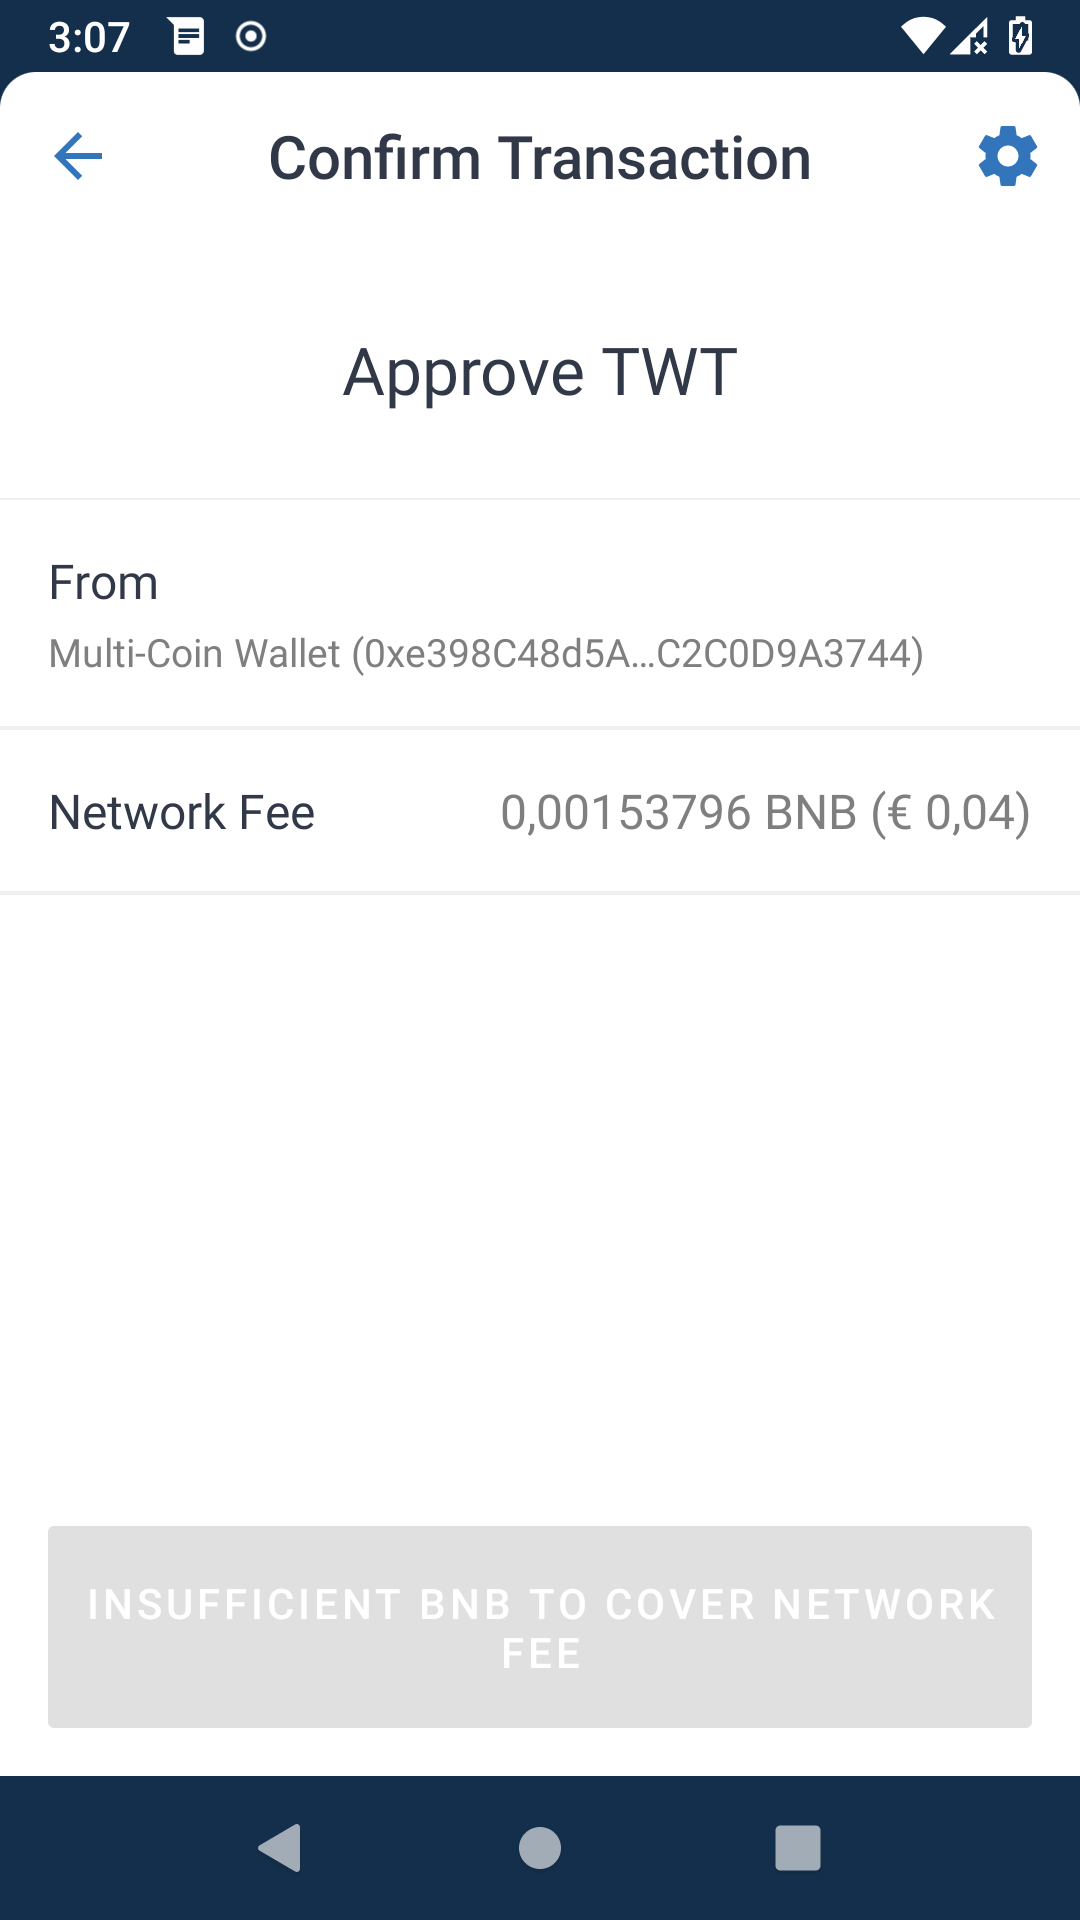 Insufficient BNB to cover network fee (2) - English ...